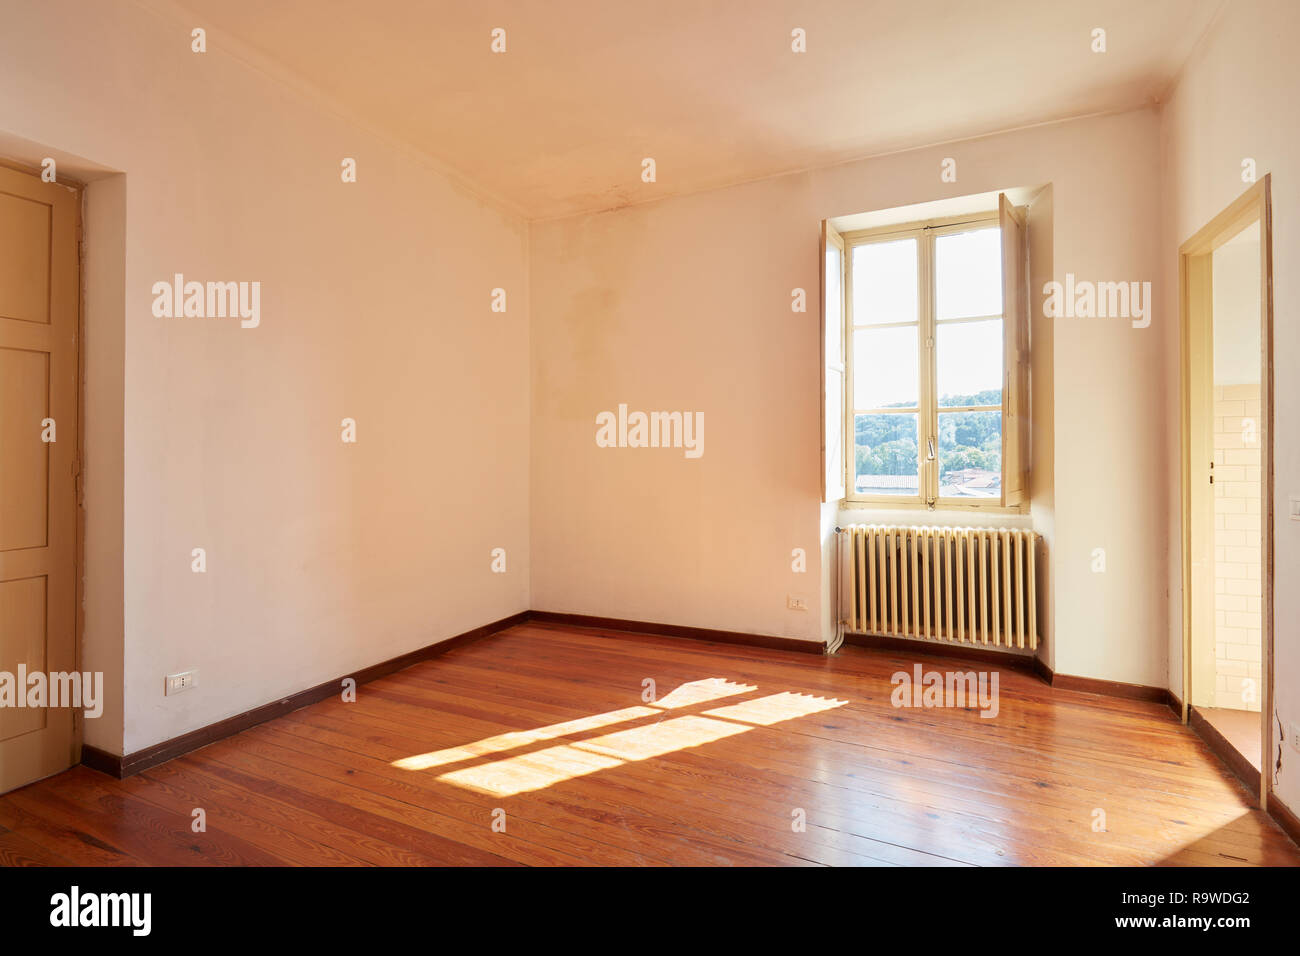 Alte, leere Zimmer mit Holzboden in coutry Haus Stockfoto